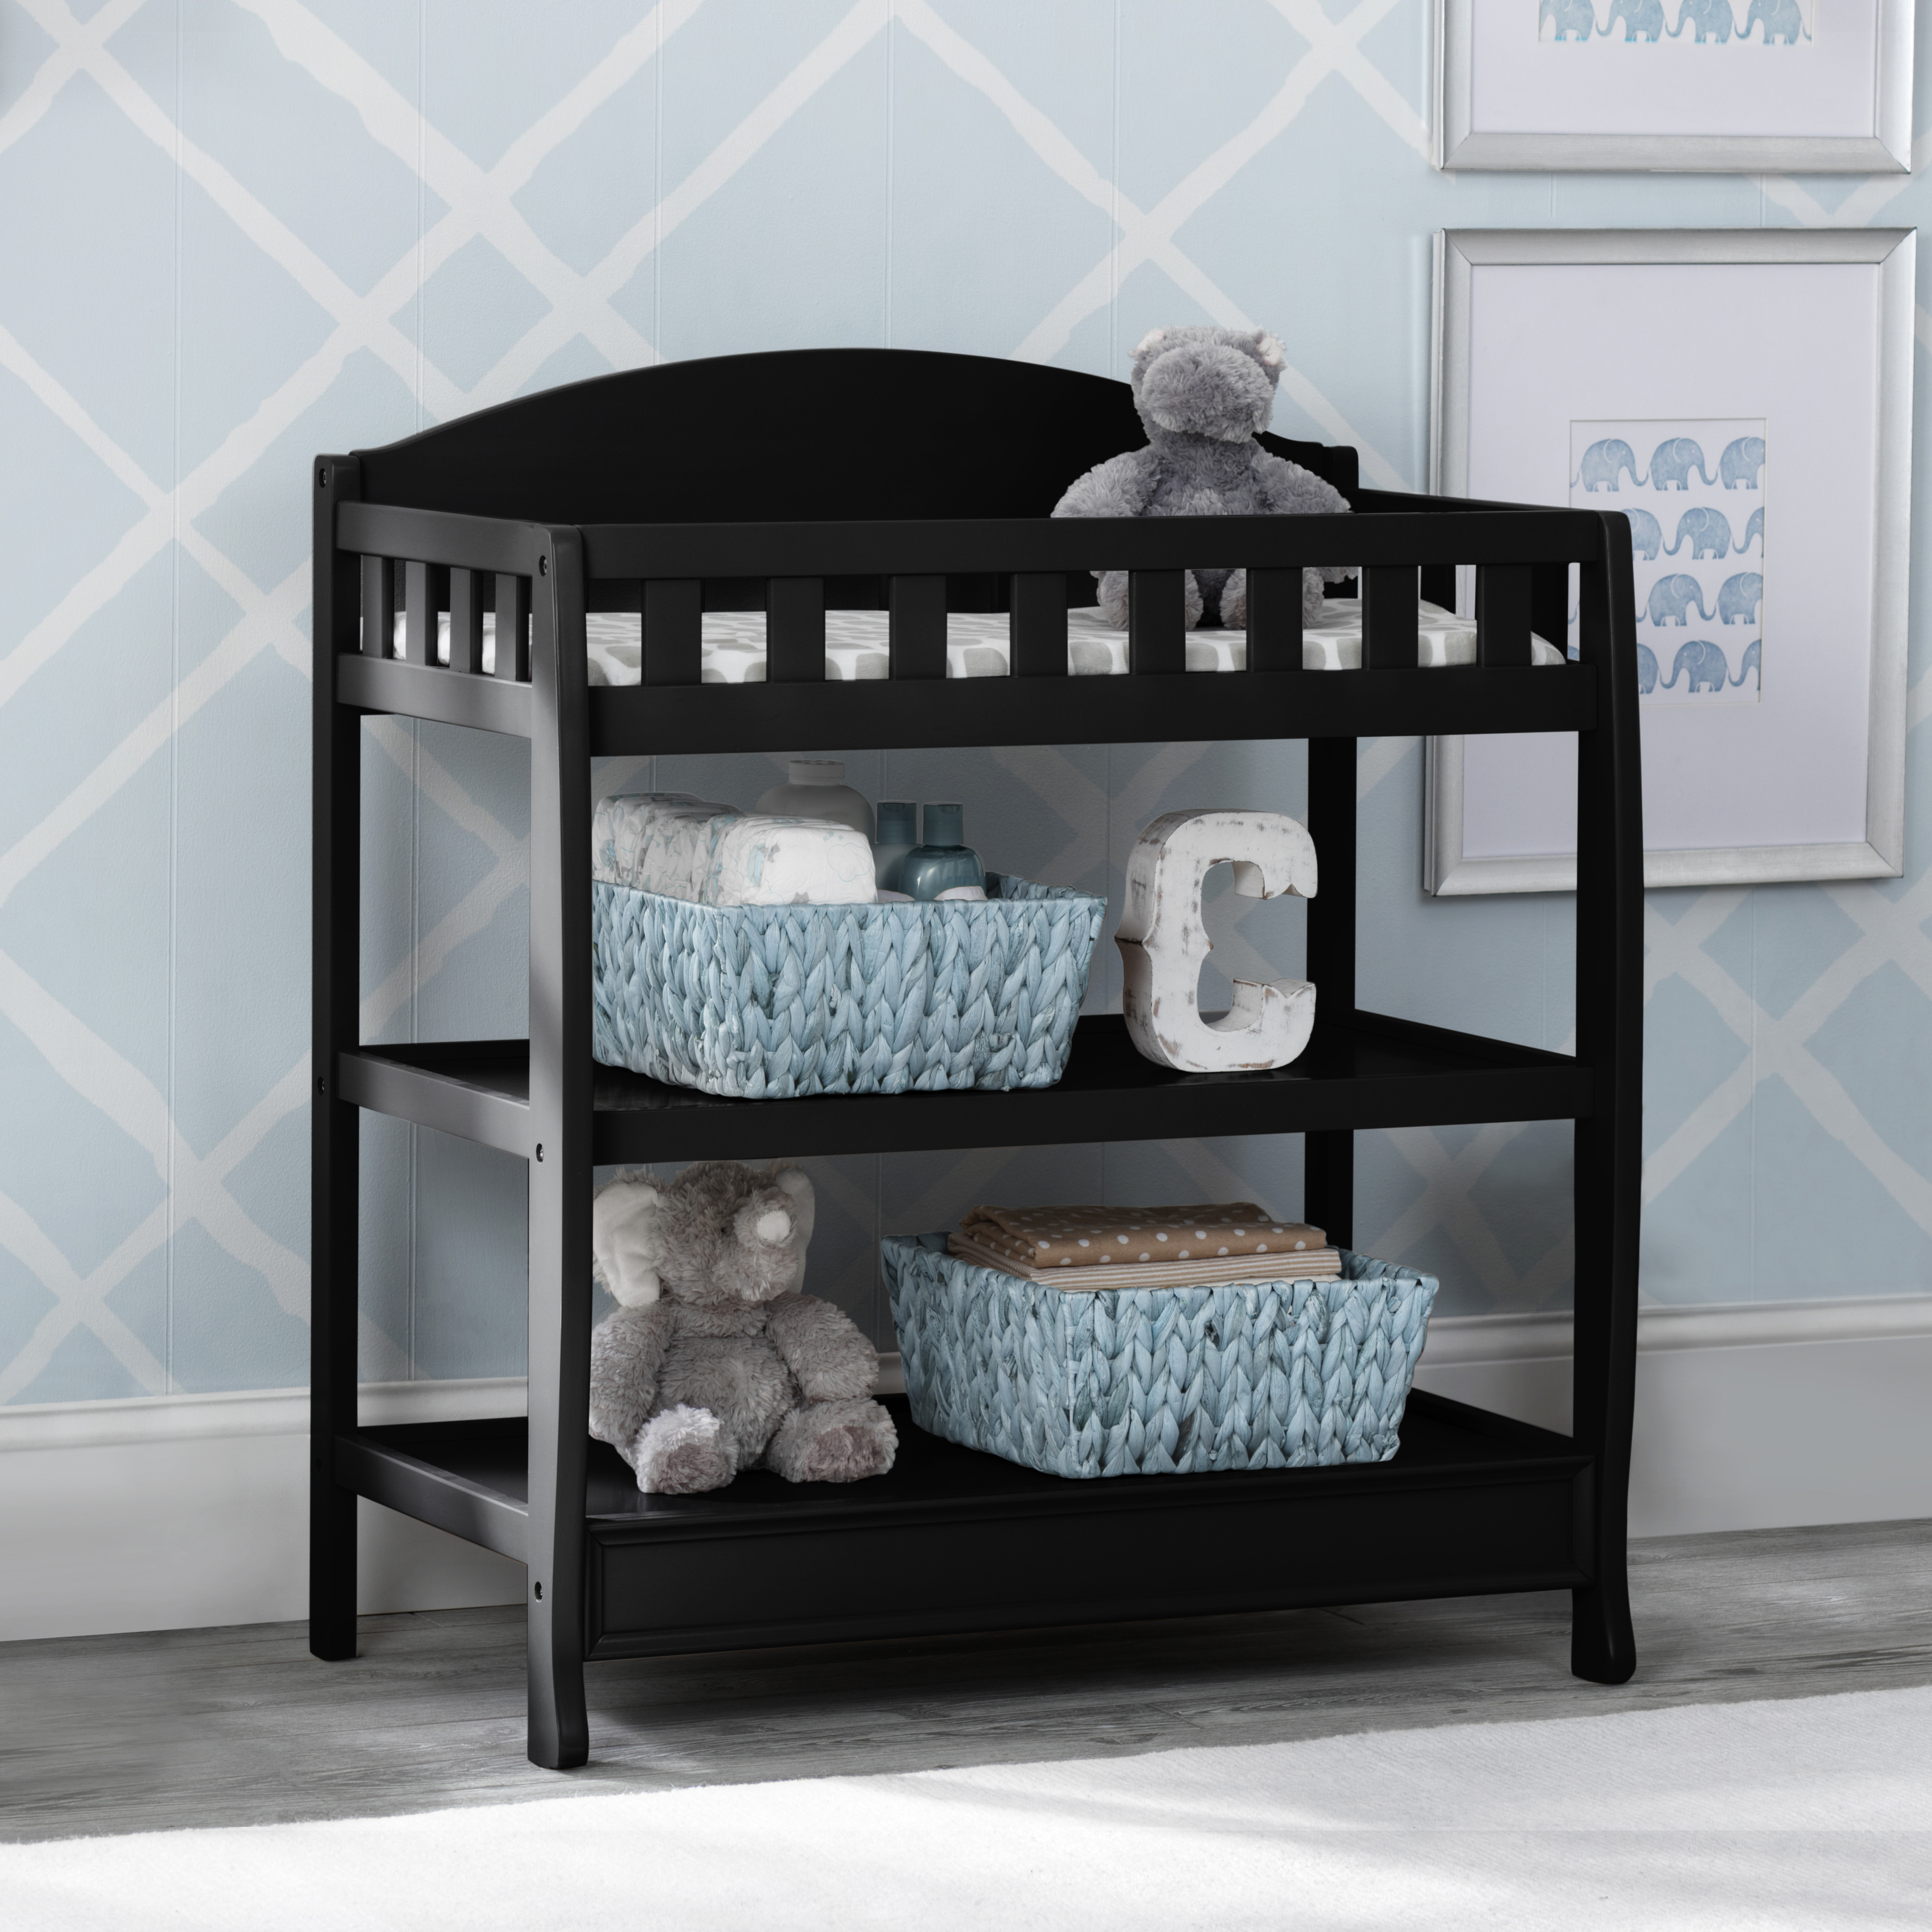 Delta Children Wilmington Changing Table with Pad, Ebony Black - image 3 of 8